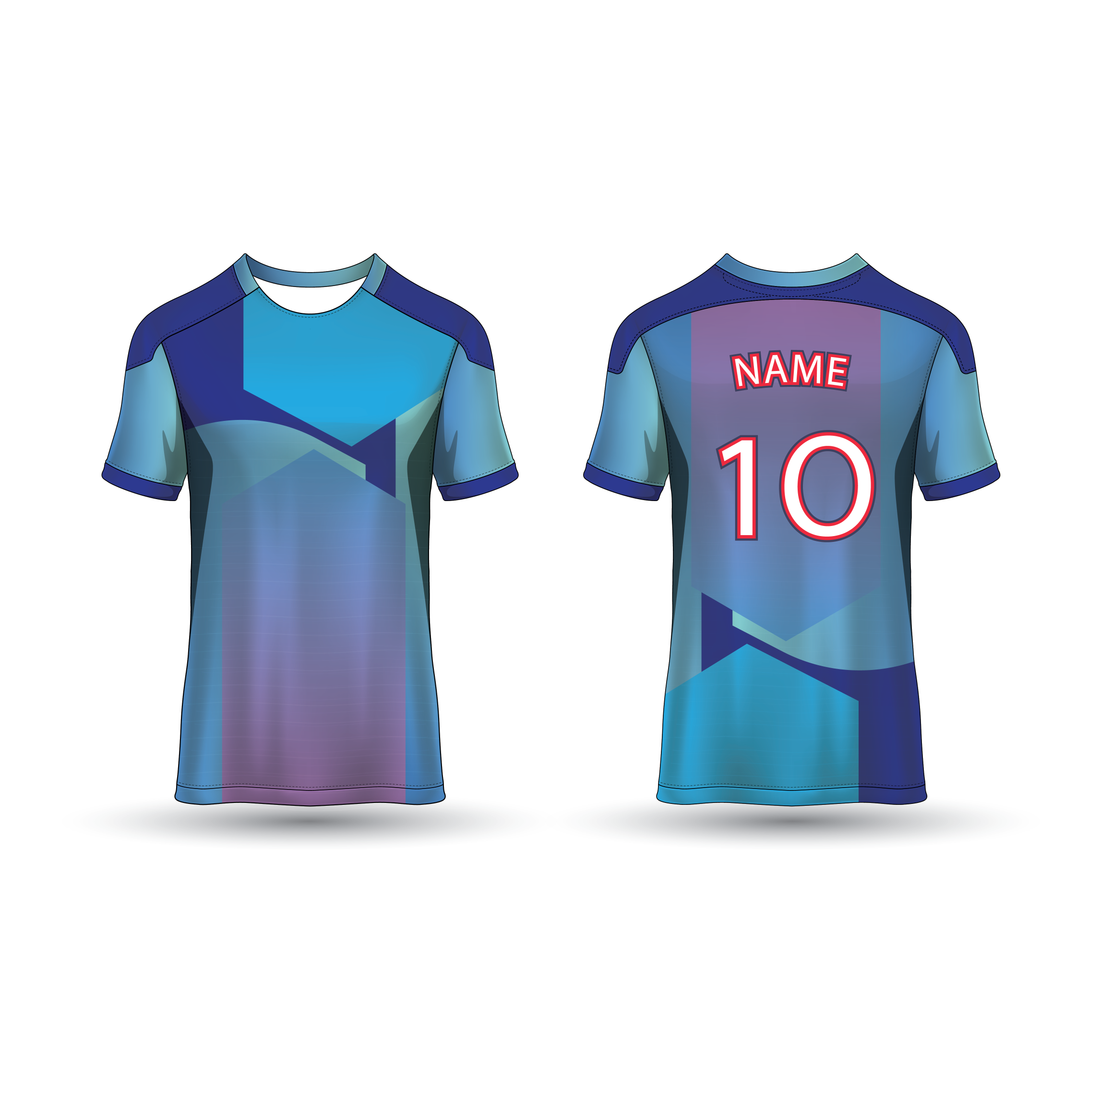 NEXT PRINT All Over Printed Customized Sublimation T-Shirt Unisex Sports Jersey Player Name & Number, Team Name NP50000232